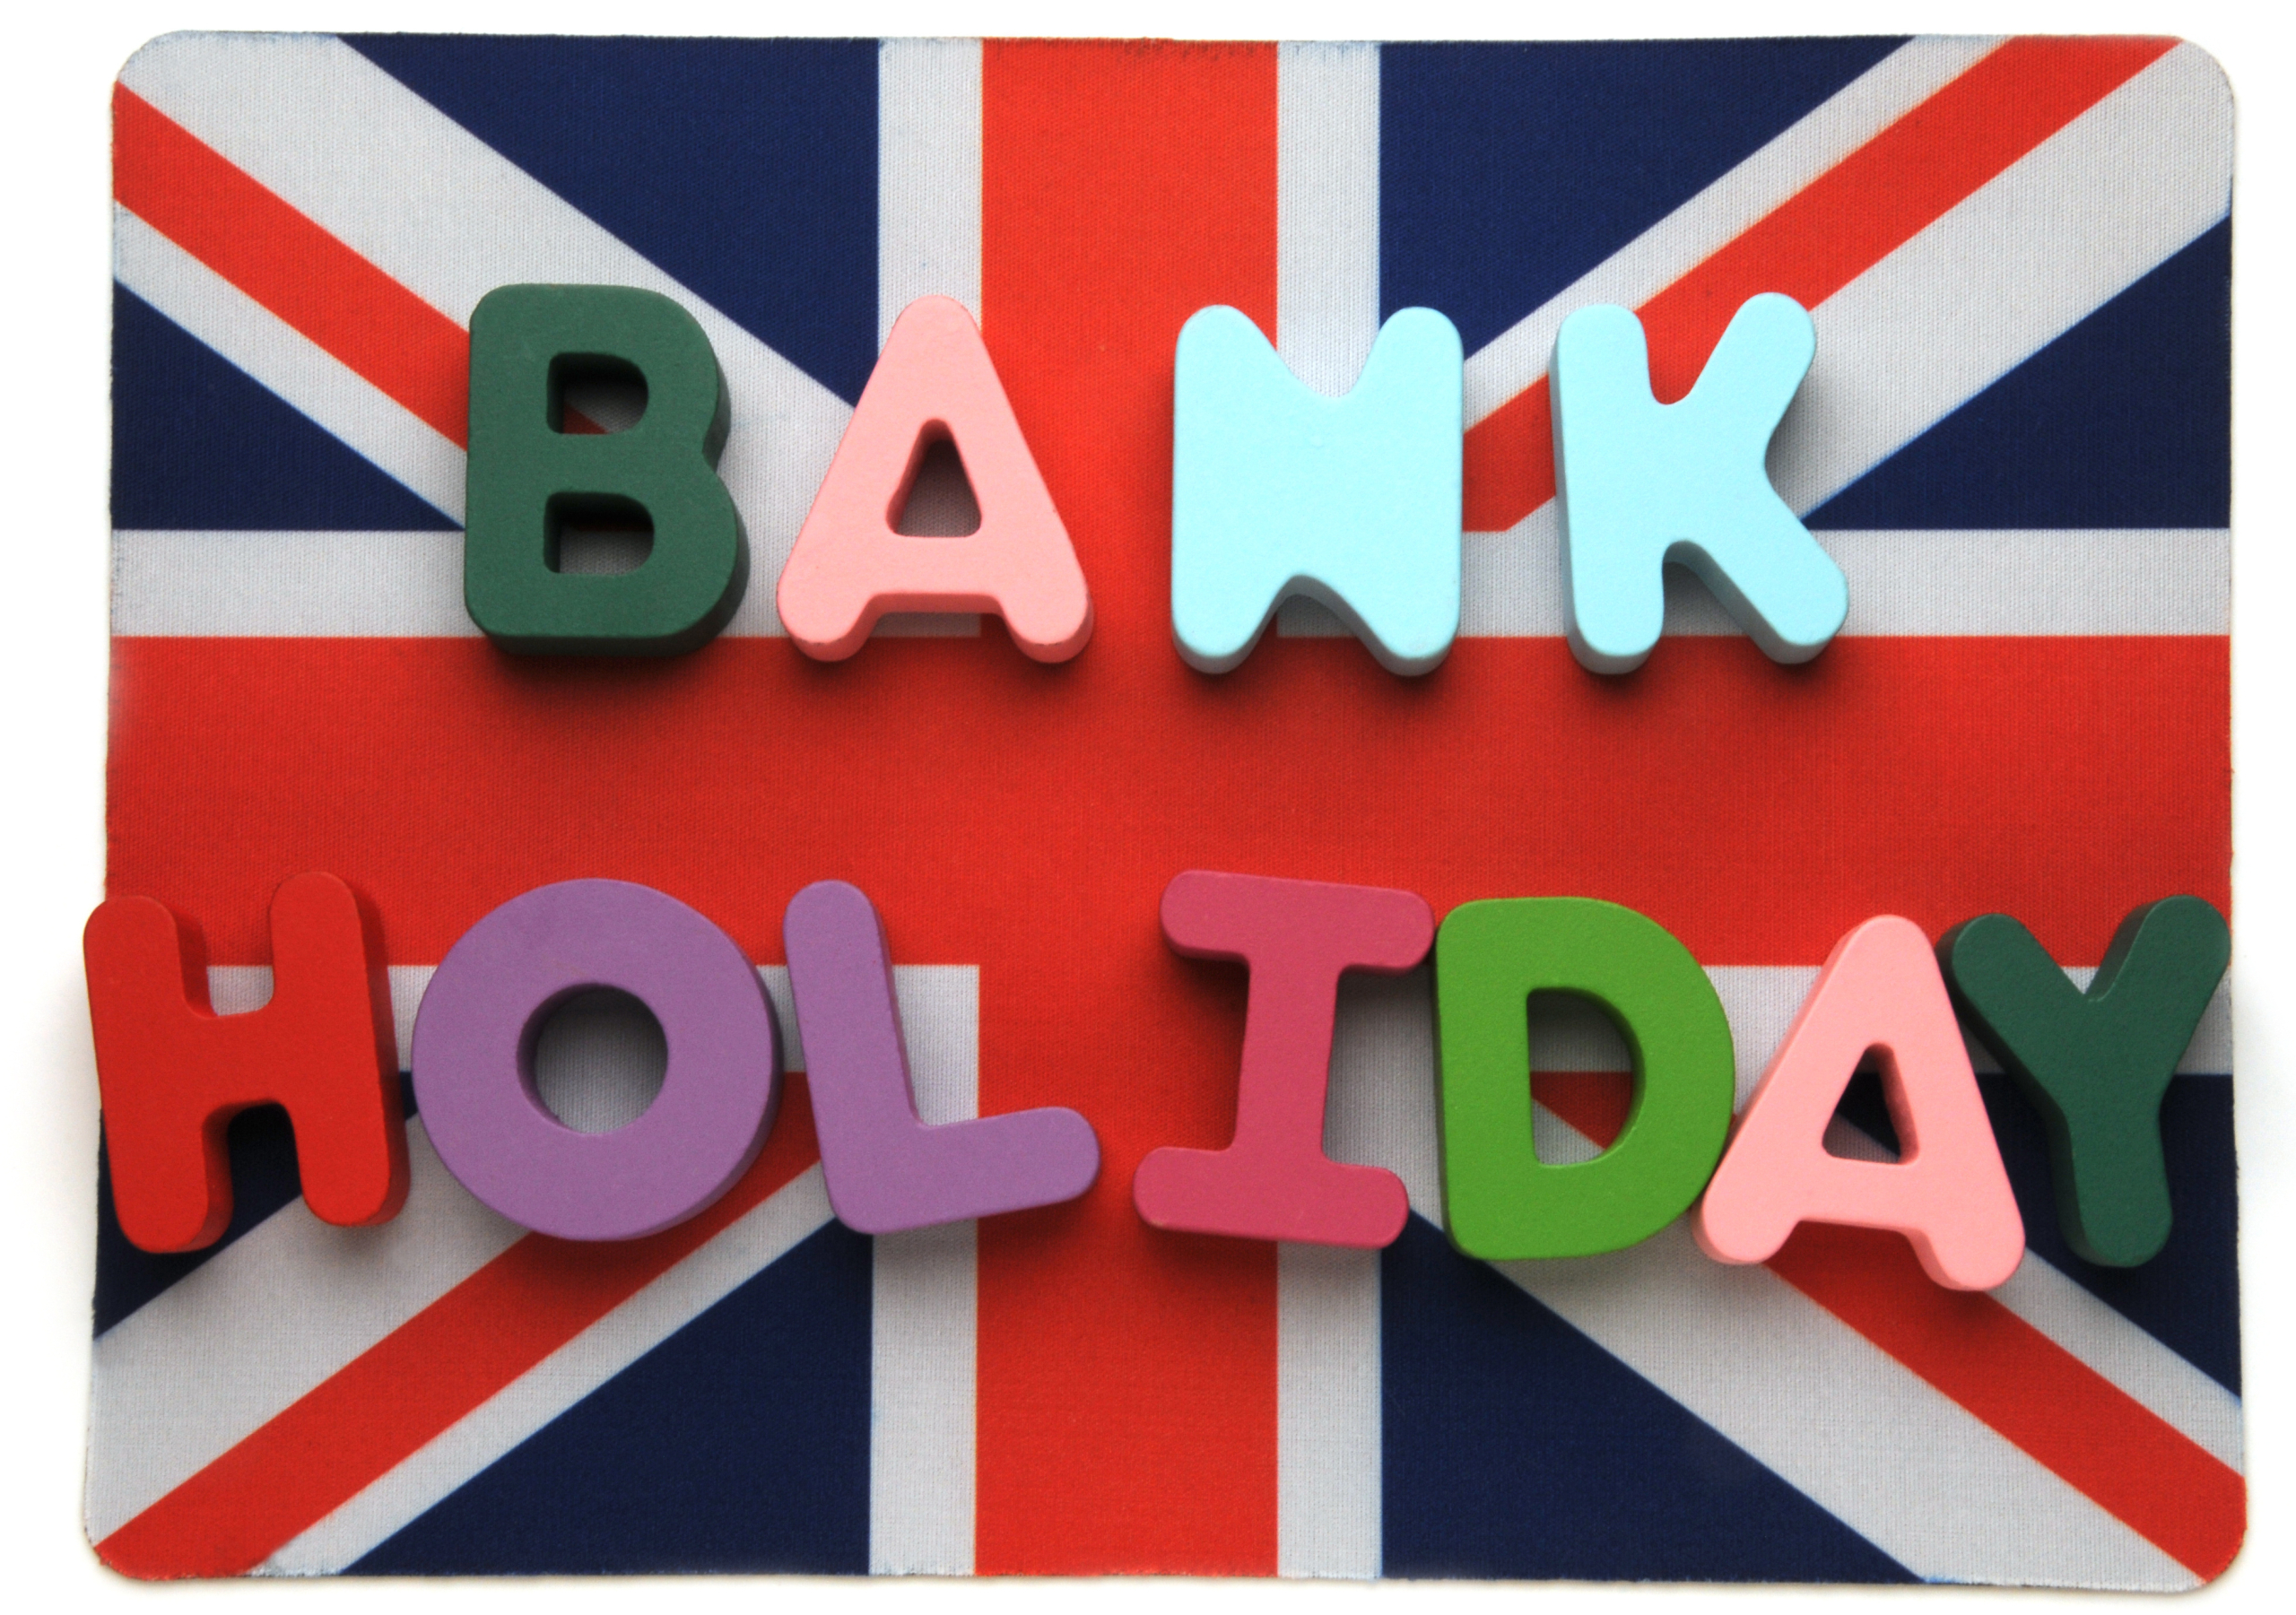 Platinum Jubilee Celebrations – An extra bank holiday for all?